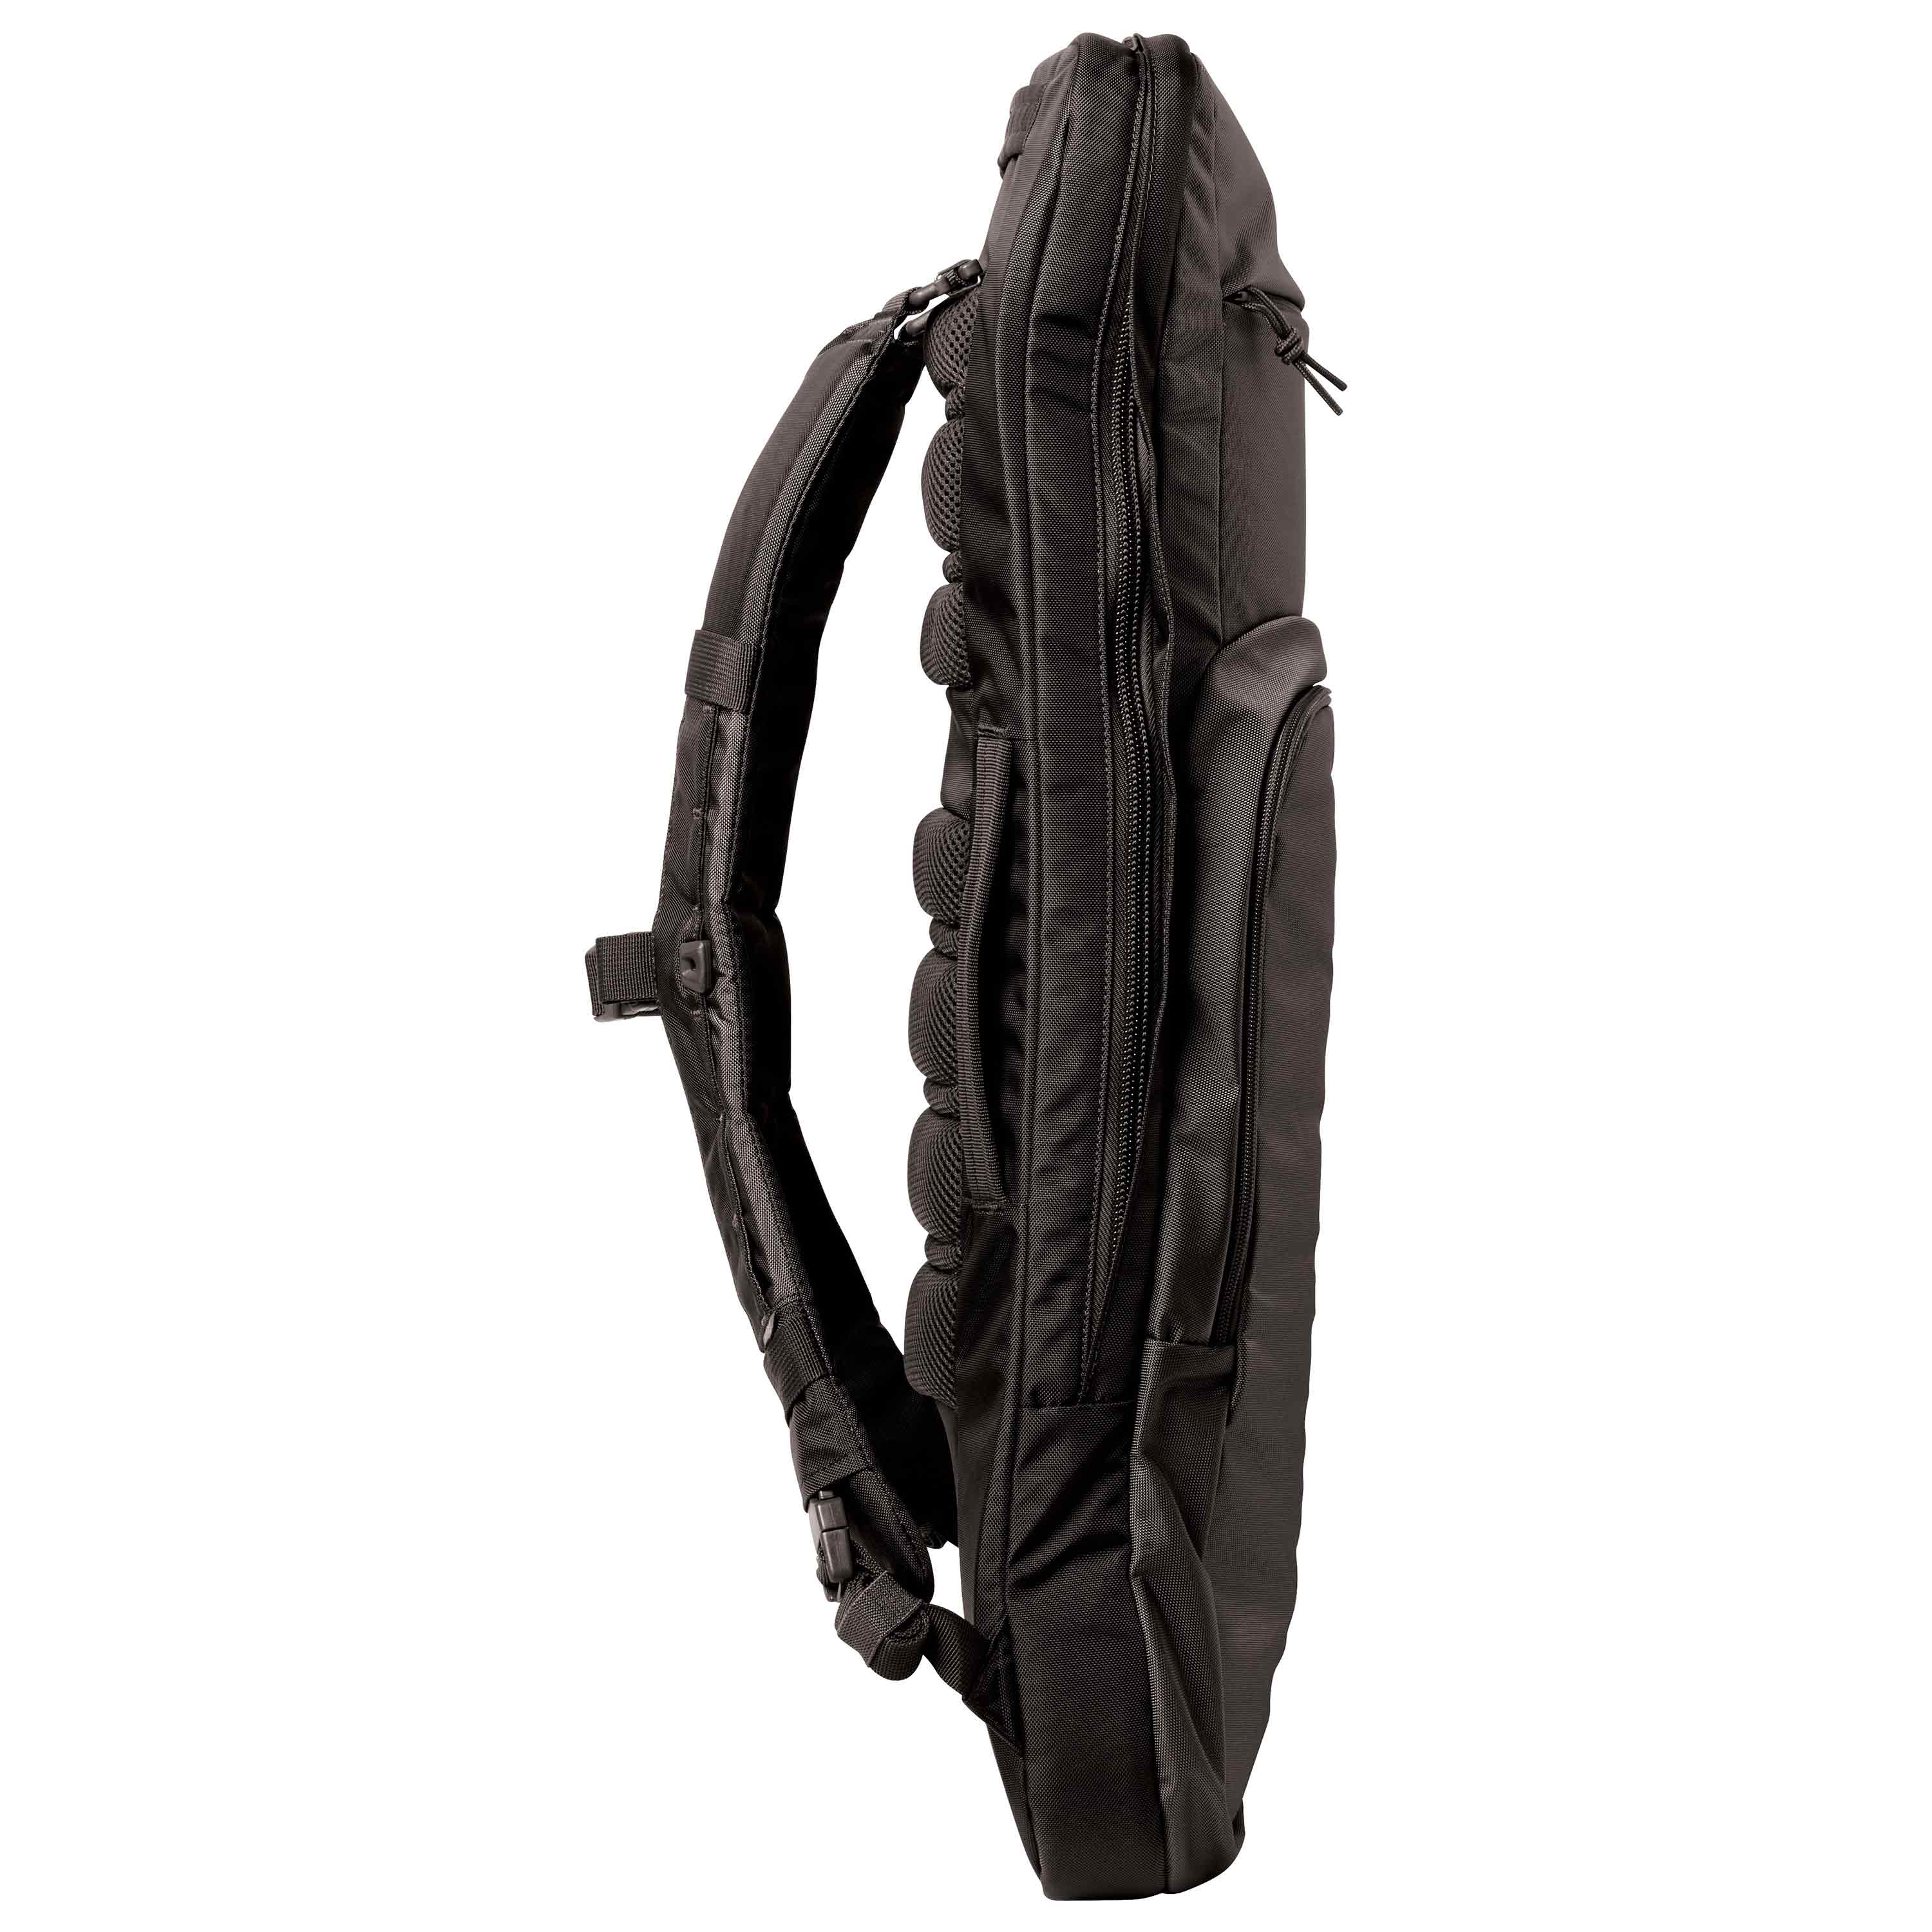 Purchase the 5.11 Rifle Backpack LV M4 tarmac by ASMC